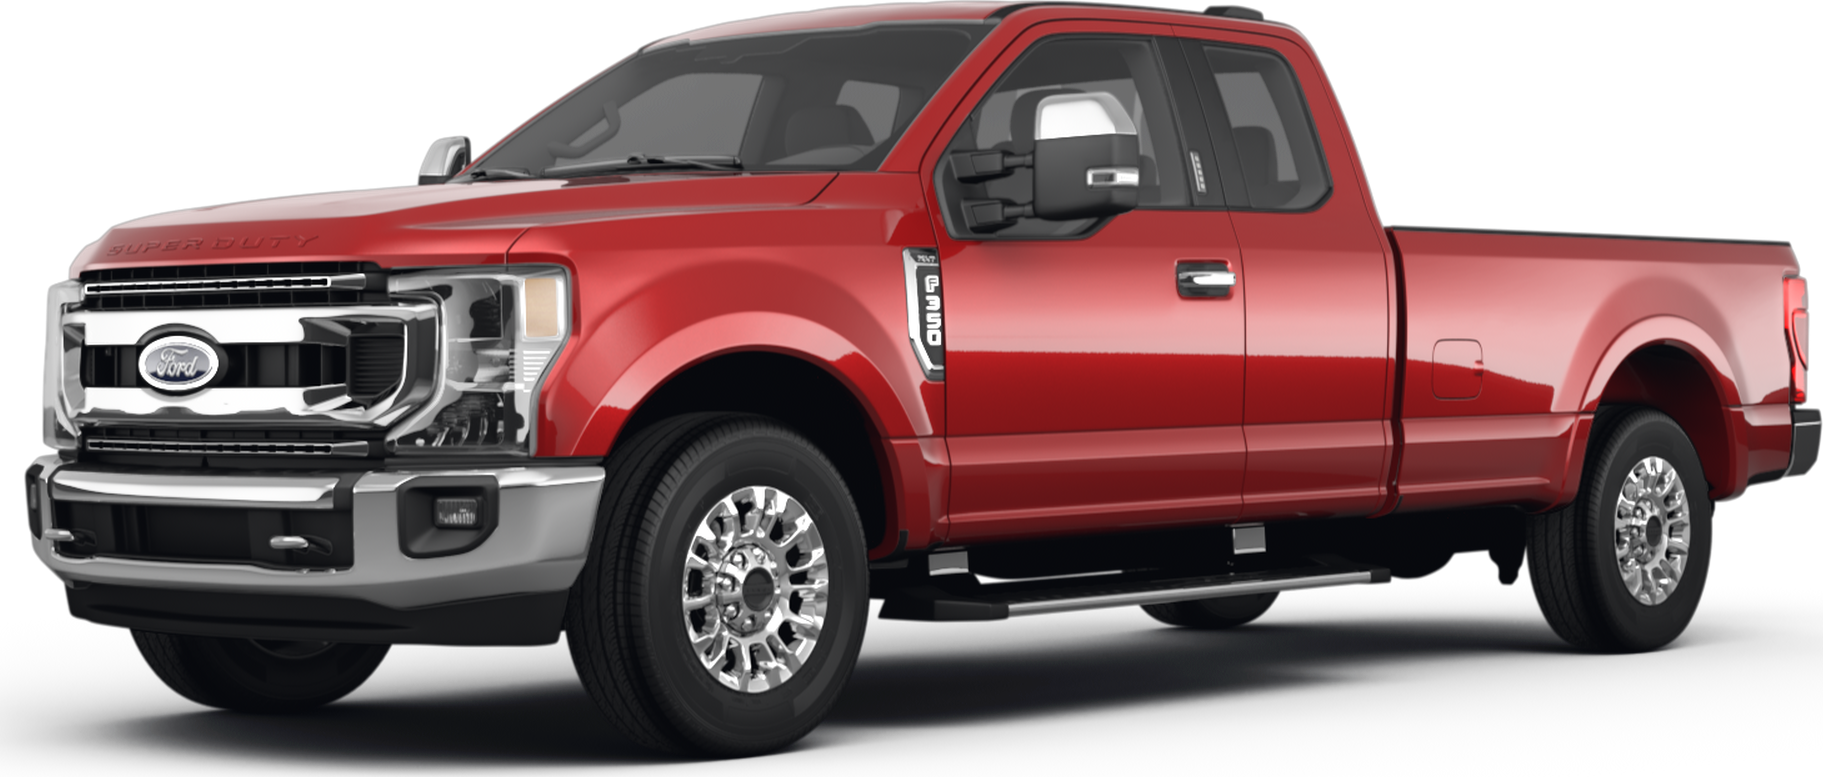 2022 Ford F350 Super Duty Super Cab Price Value Ratings And Reviews